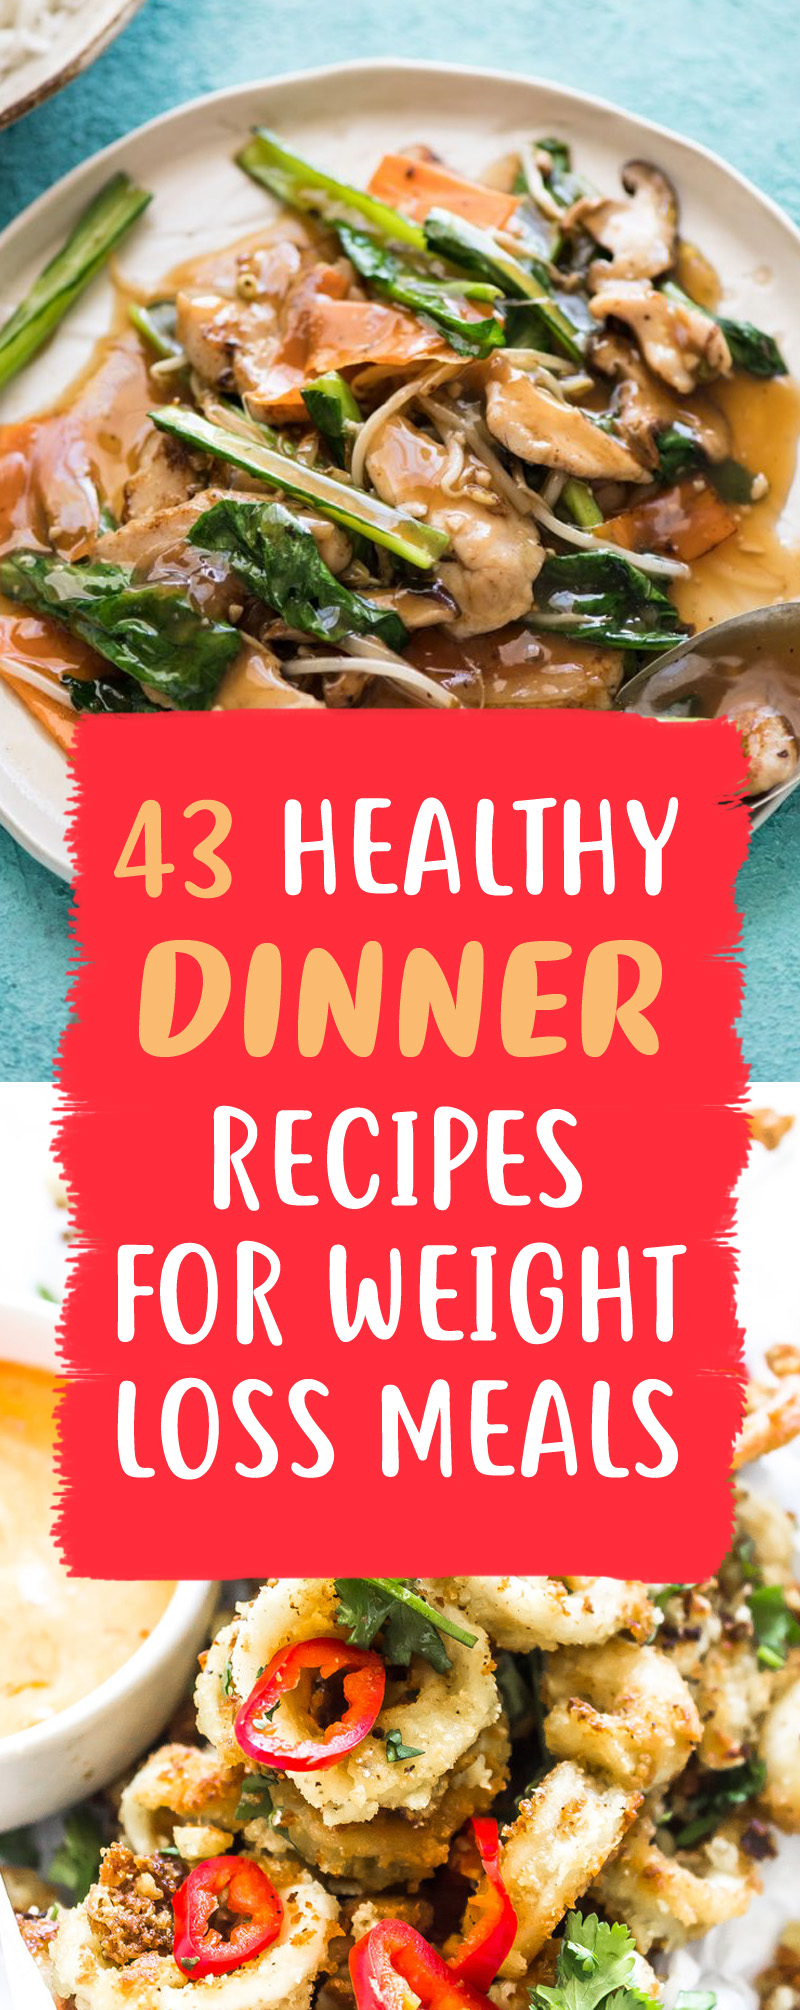 43 Perfect Weight Loss Dinner Recipes For A Slimmer Stomach! TrimmedandToned